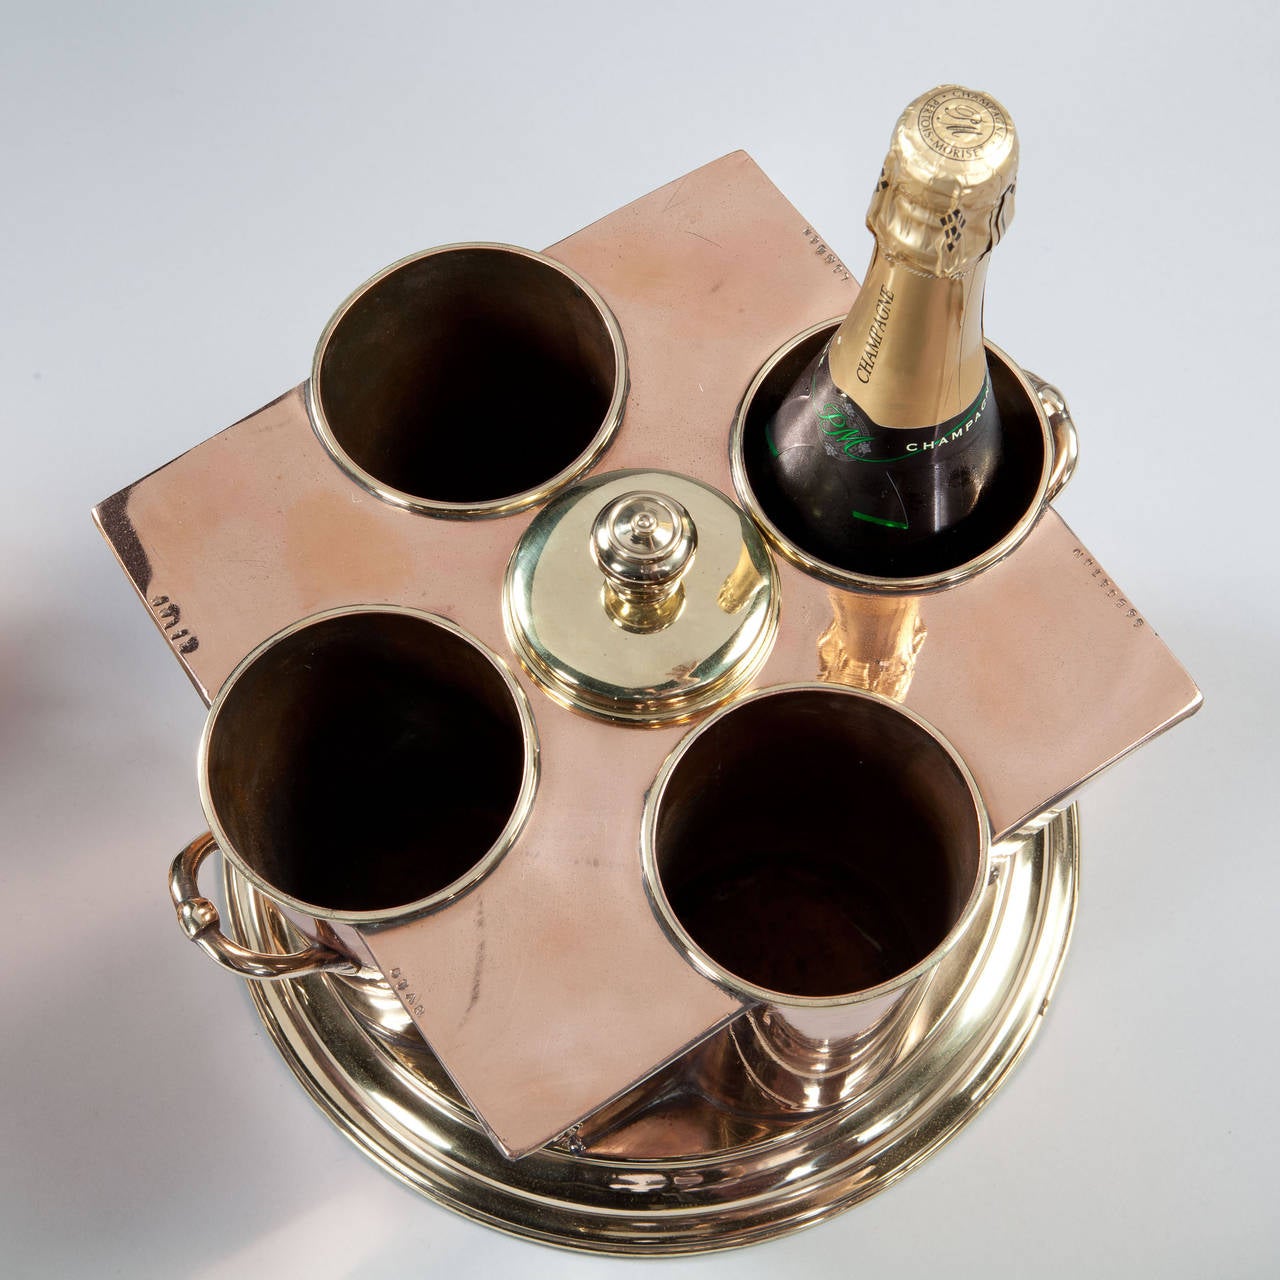 English Pair of Mid-20th Century Champagne Coolers